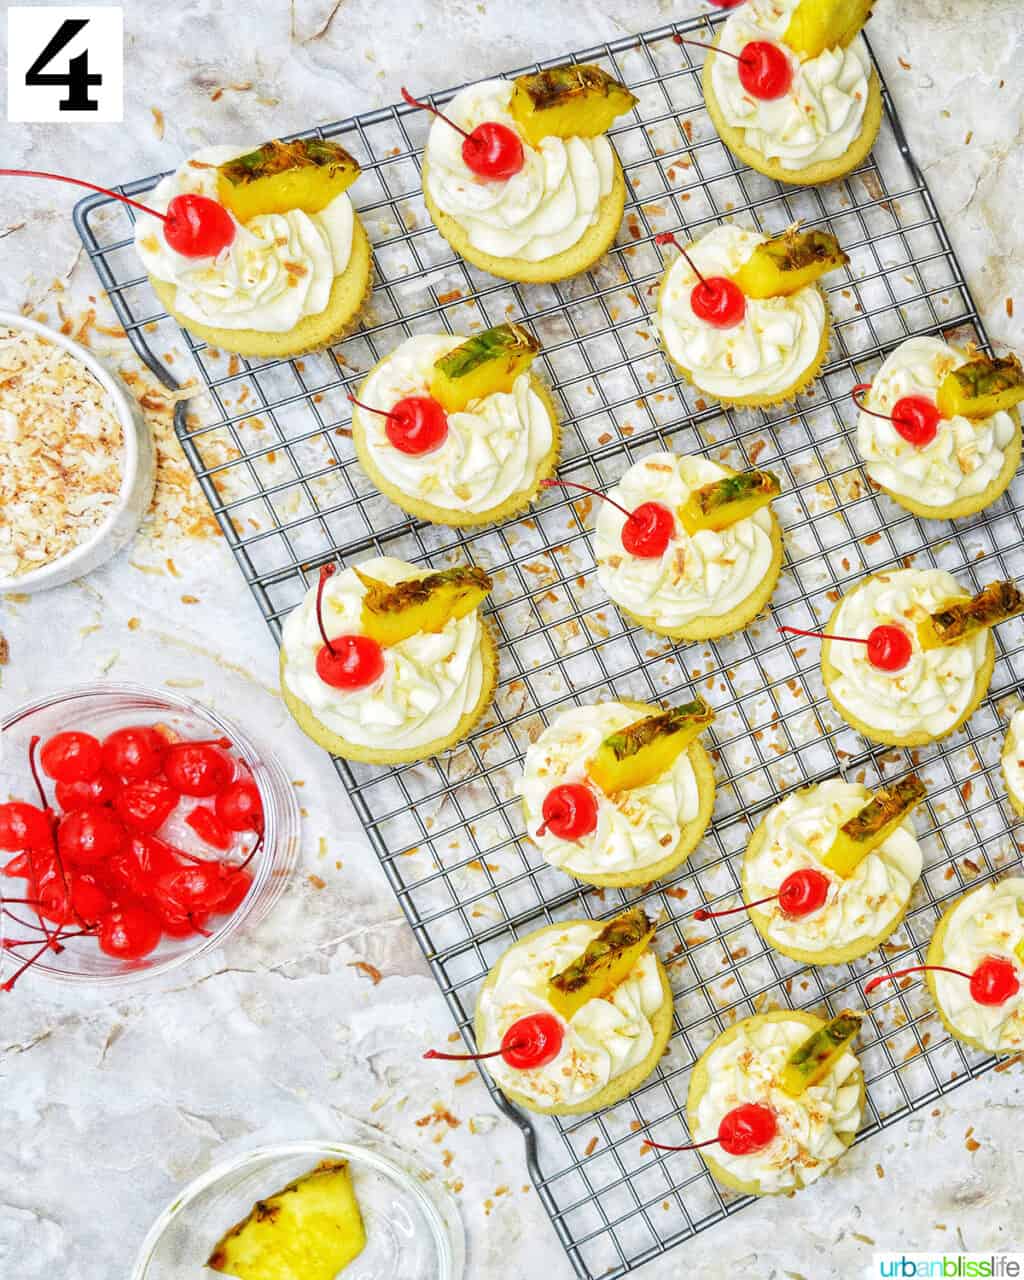 pina colada cupcakes frosted with lime slices and maraschino cherries on a wire rack.